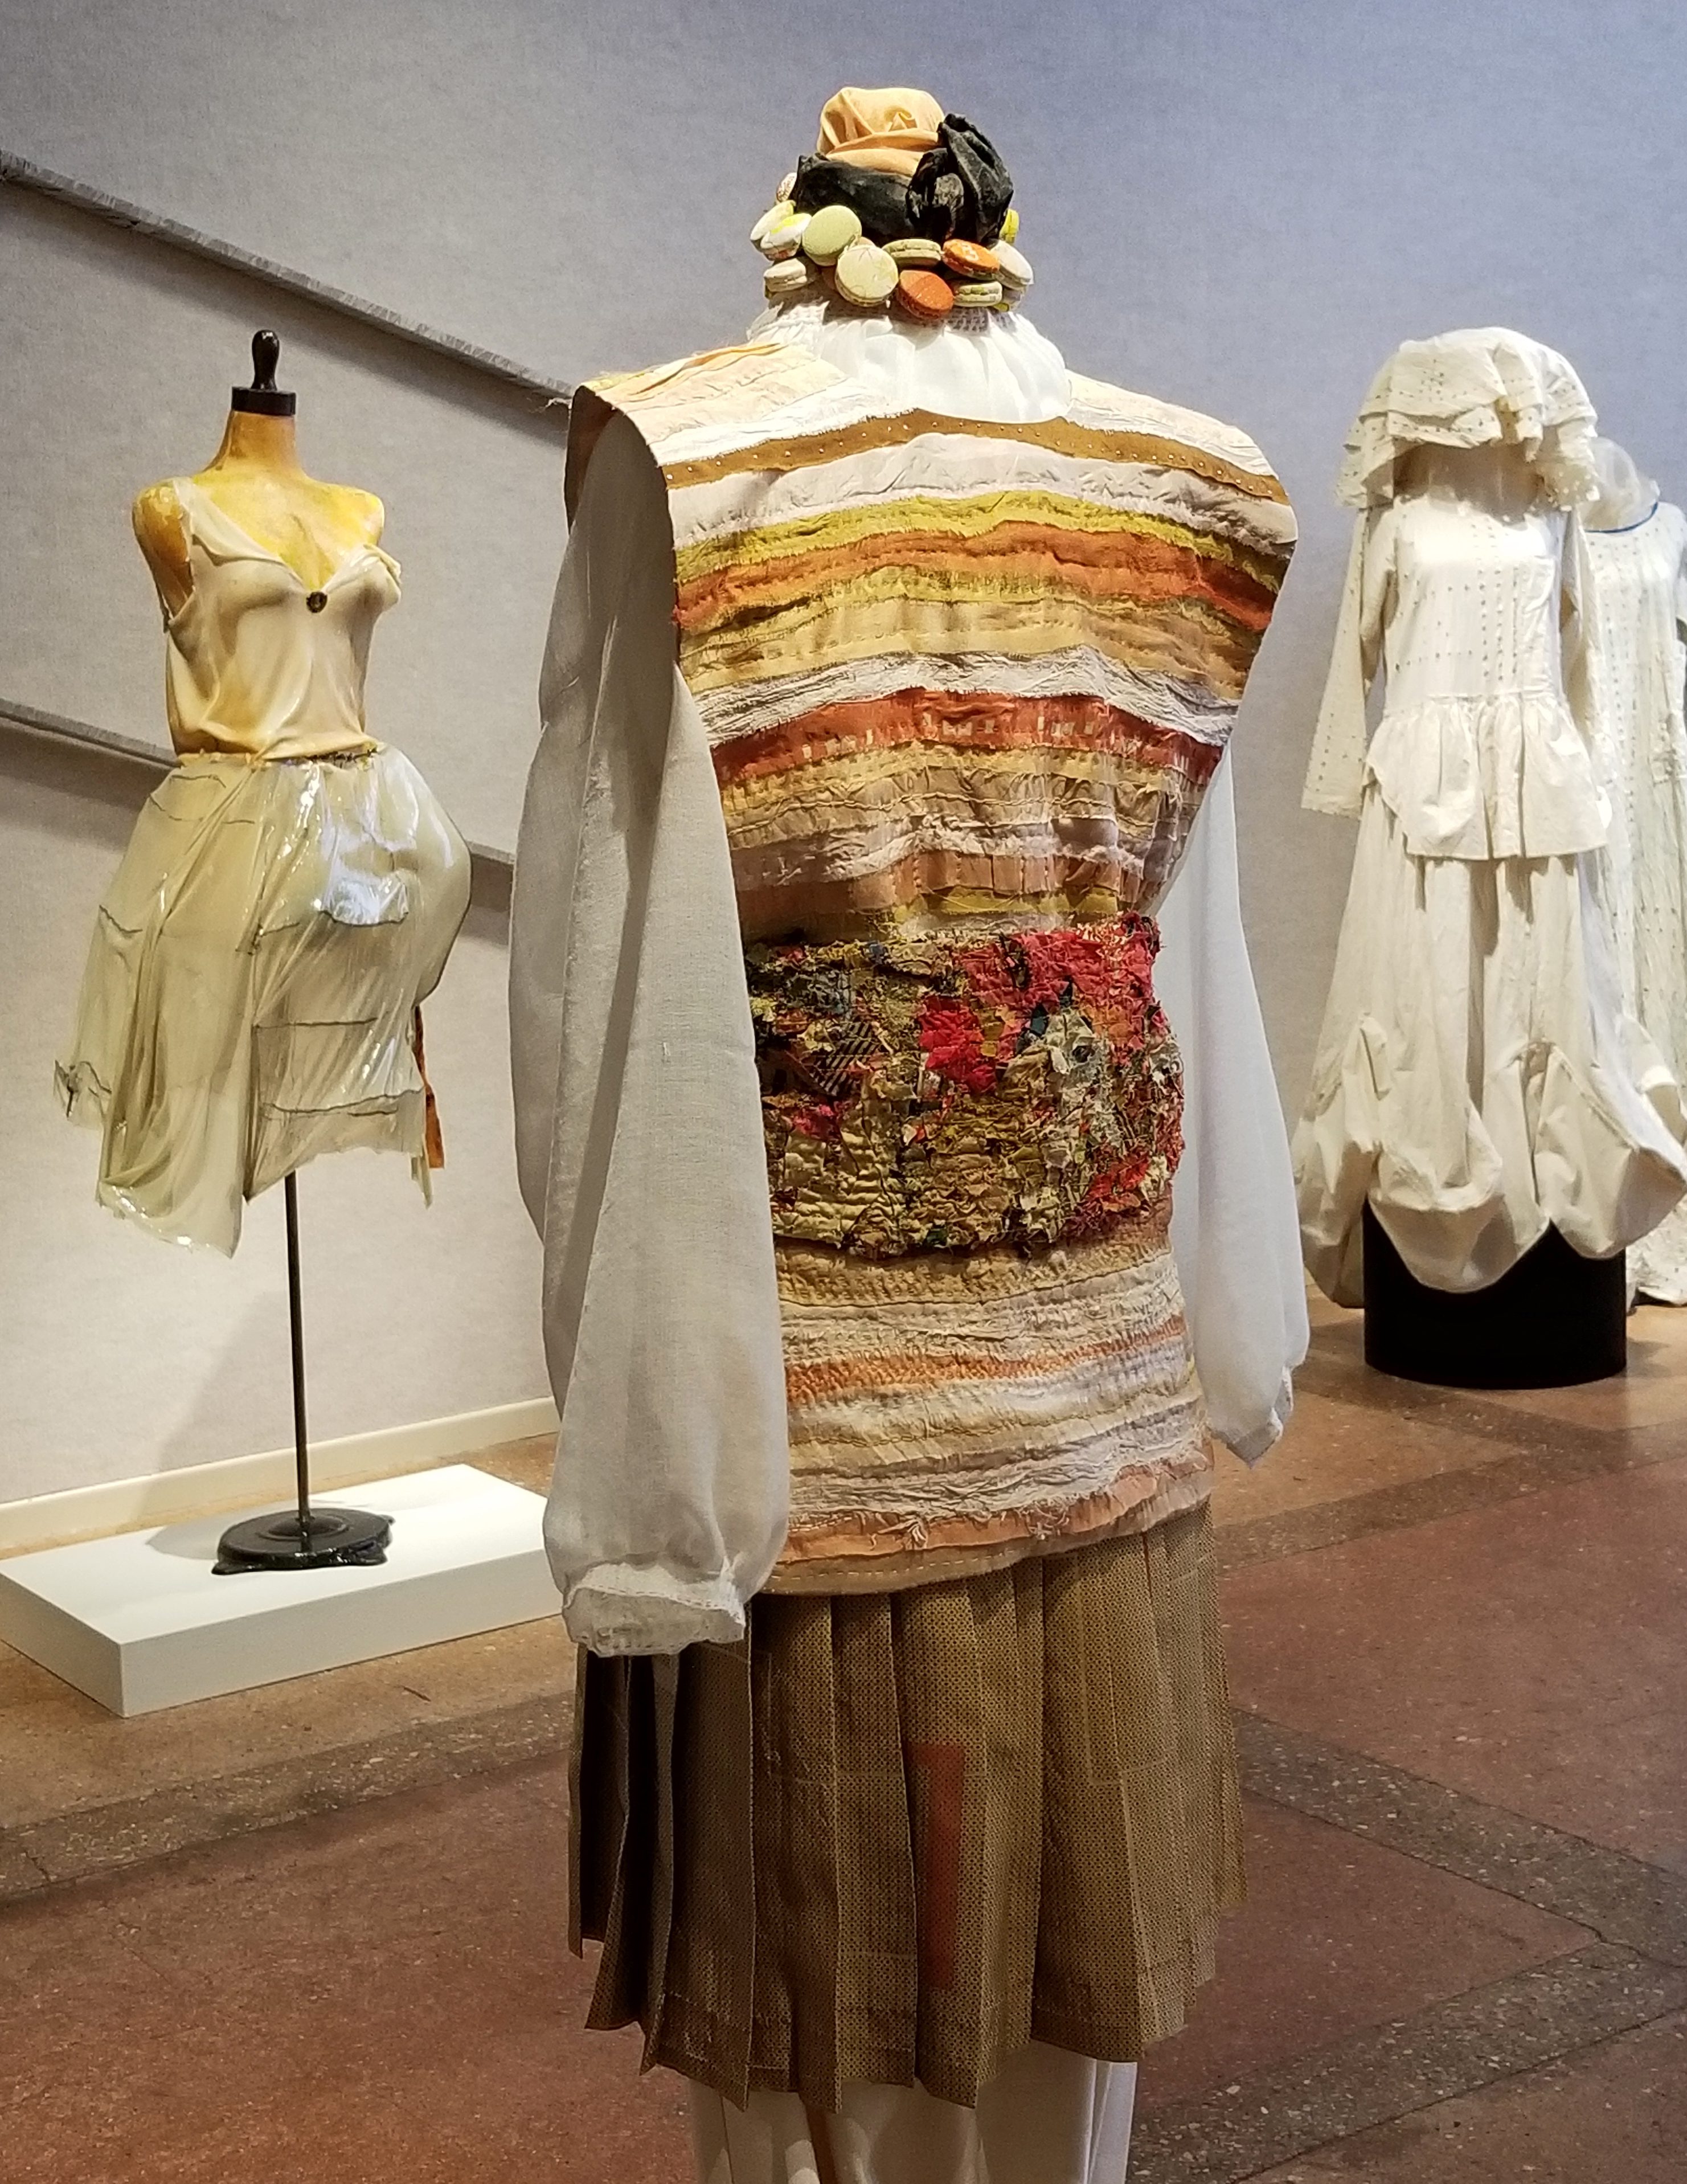 “The Art of Dress” gallery talk and last call reception Aug. 3